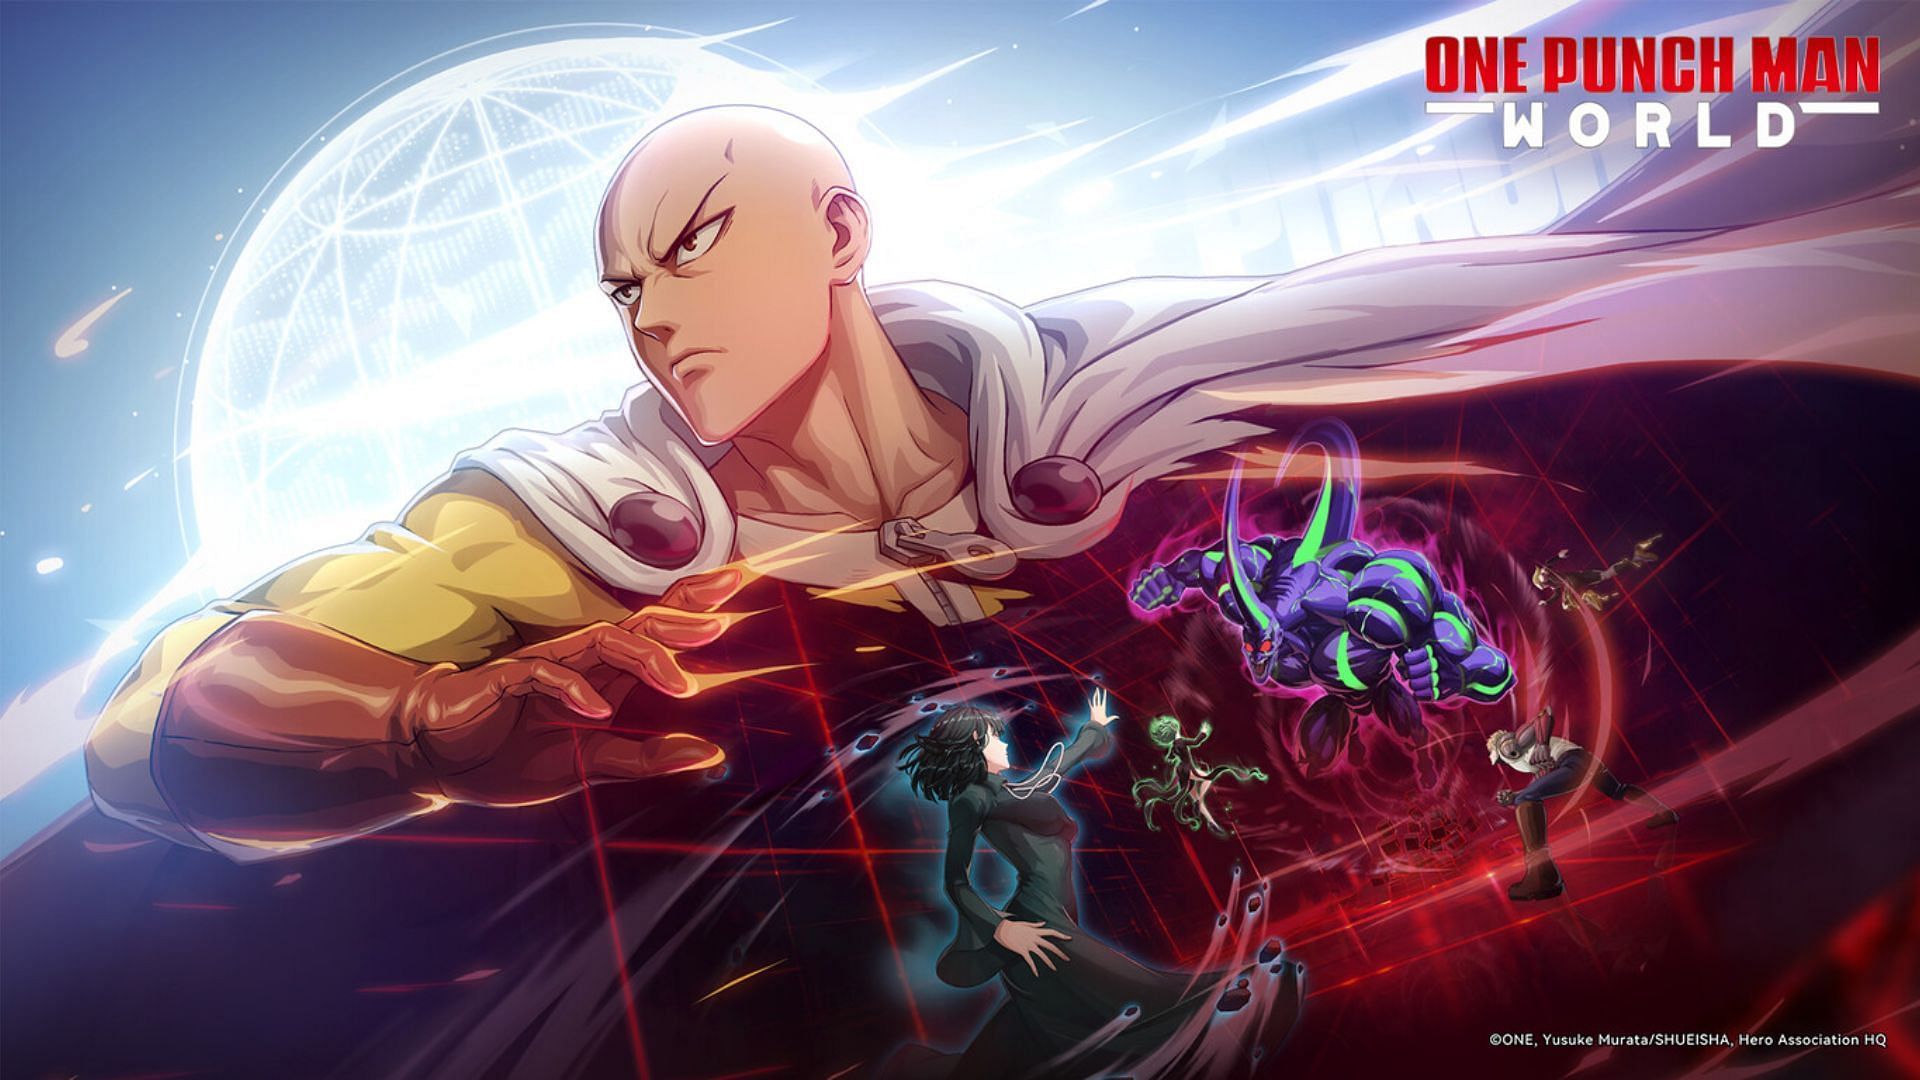 One Punch Man World will be an open-world action RPG title. (Image via Crunchyroll Games)